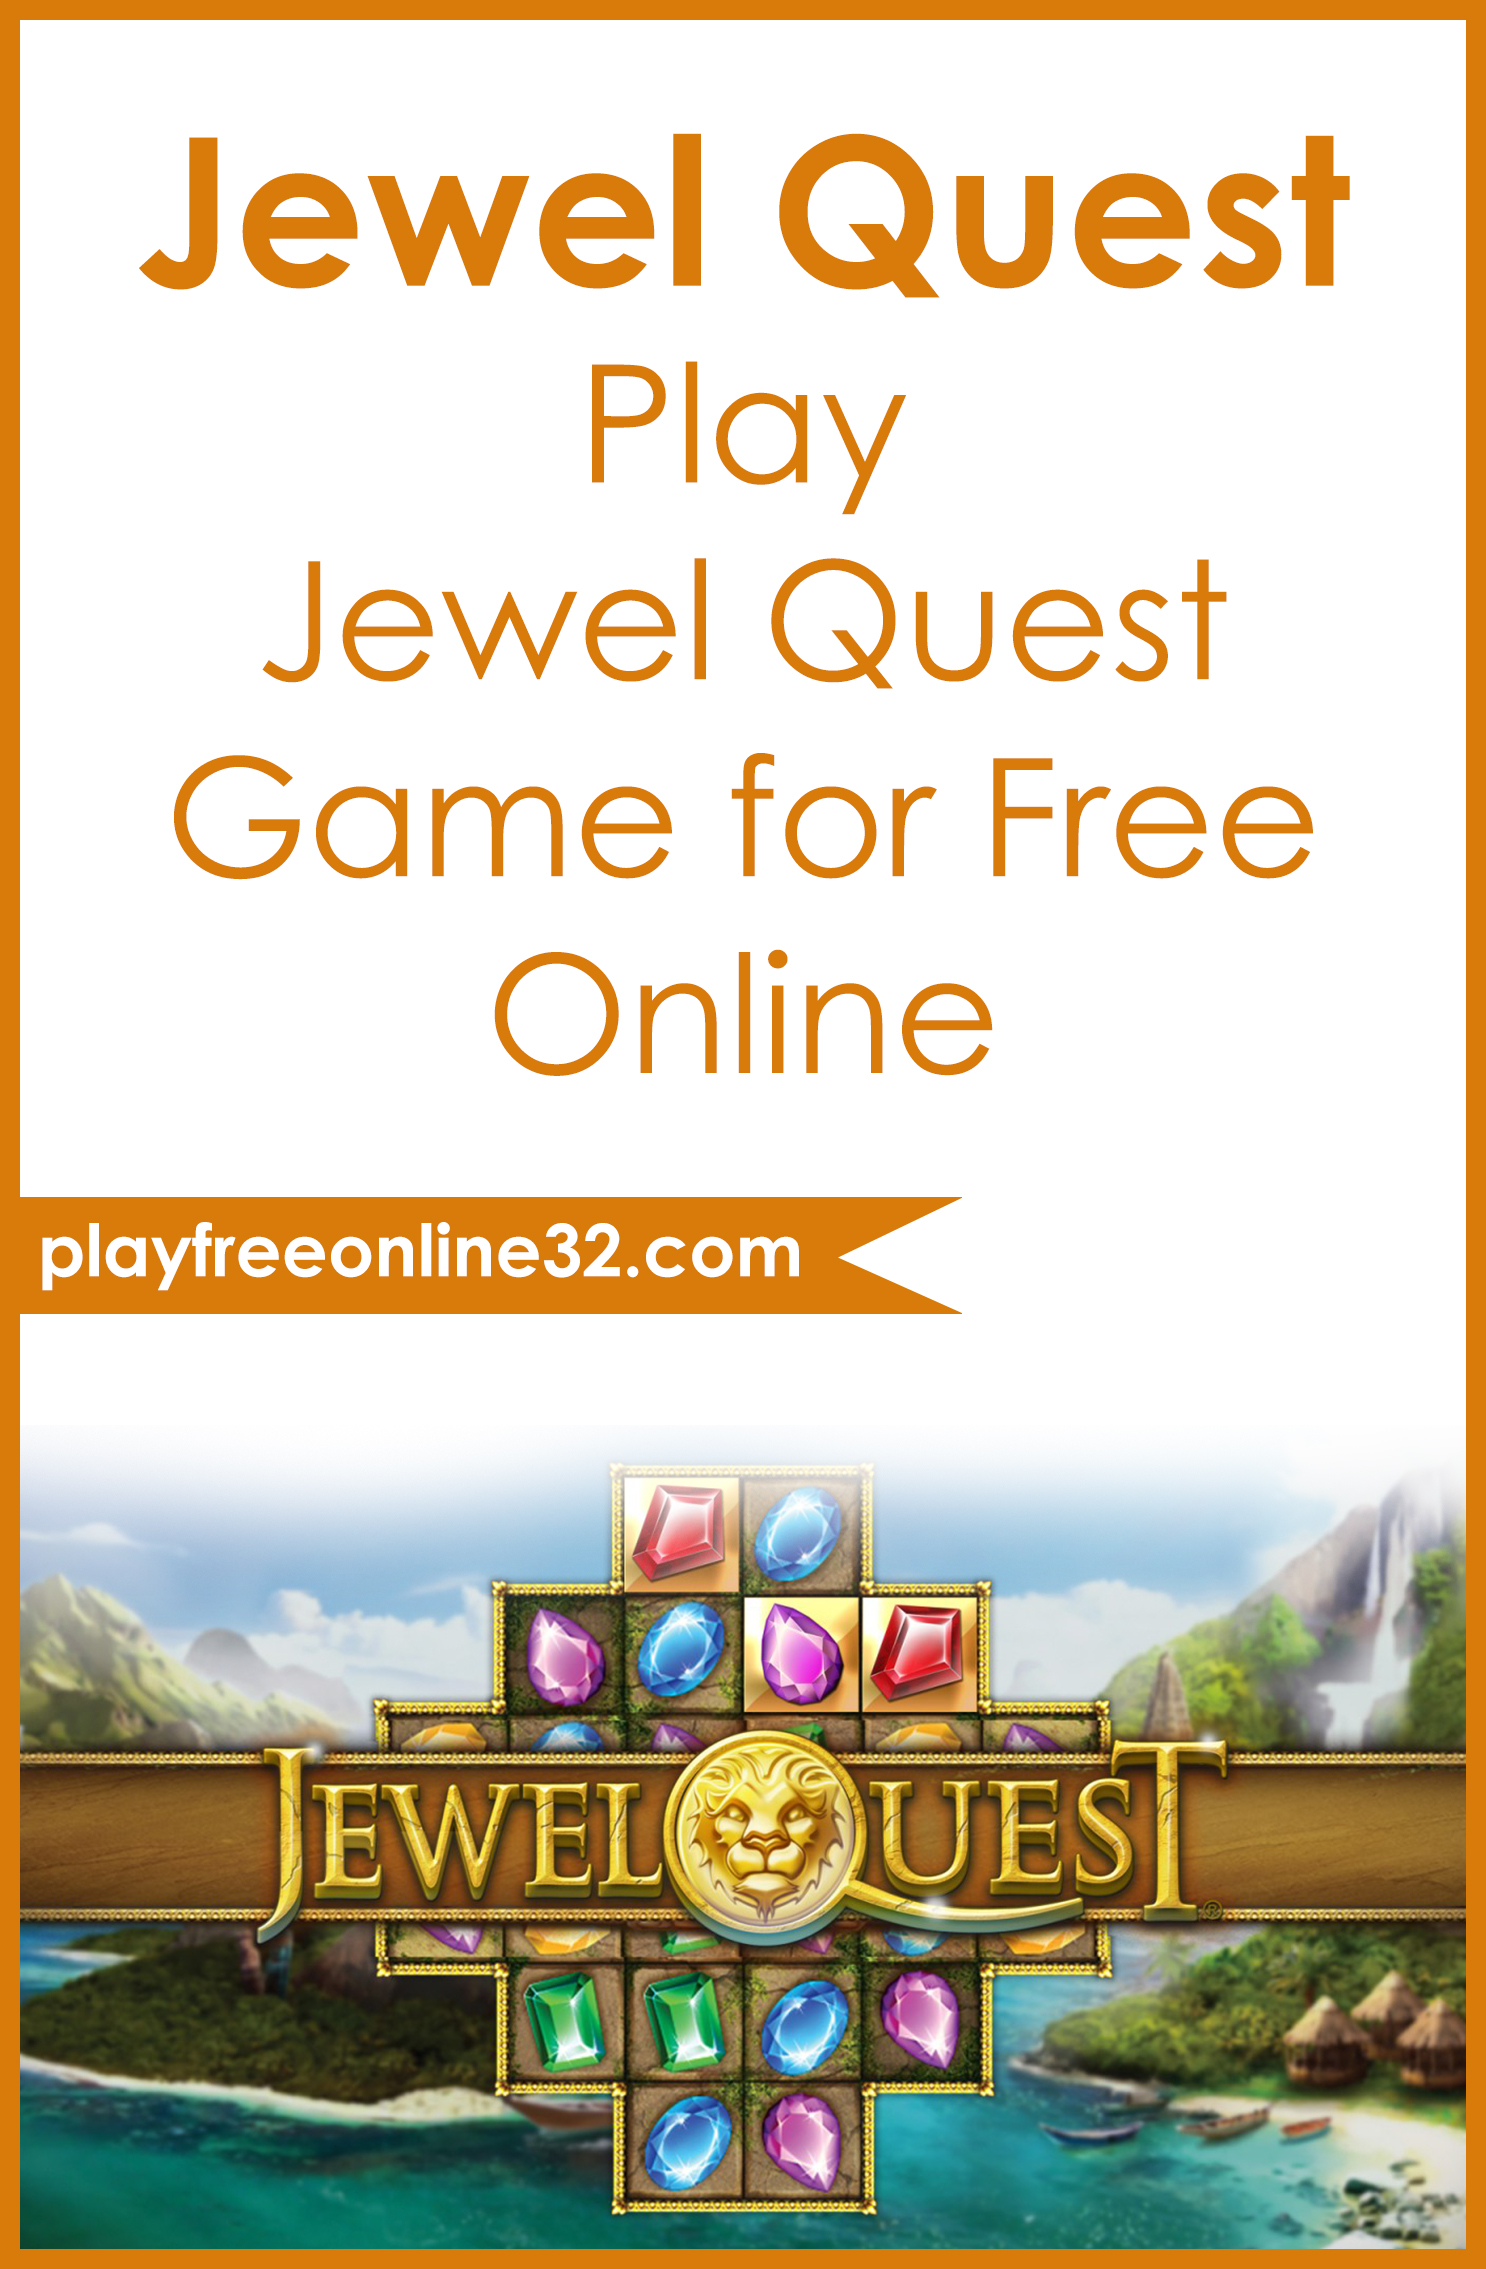 Jewel Quest • Play Jewel Quest Game for Free Online Pinterest post